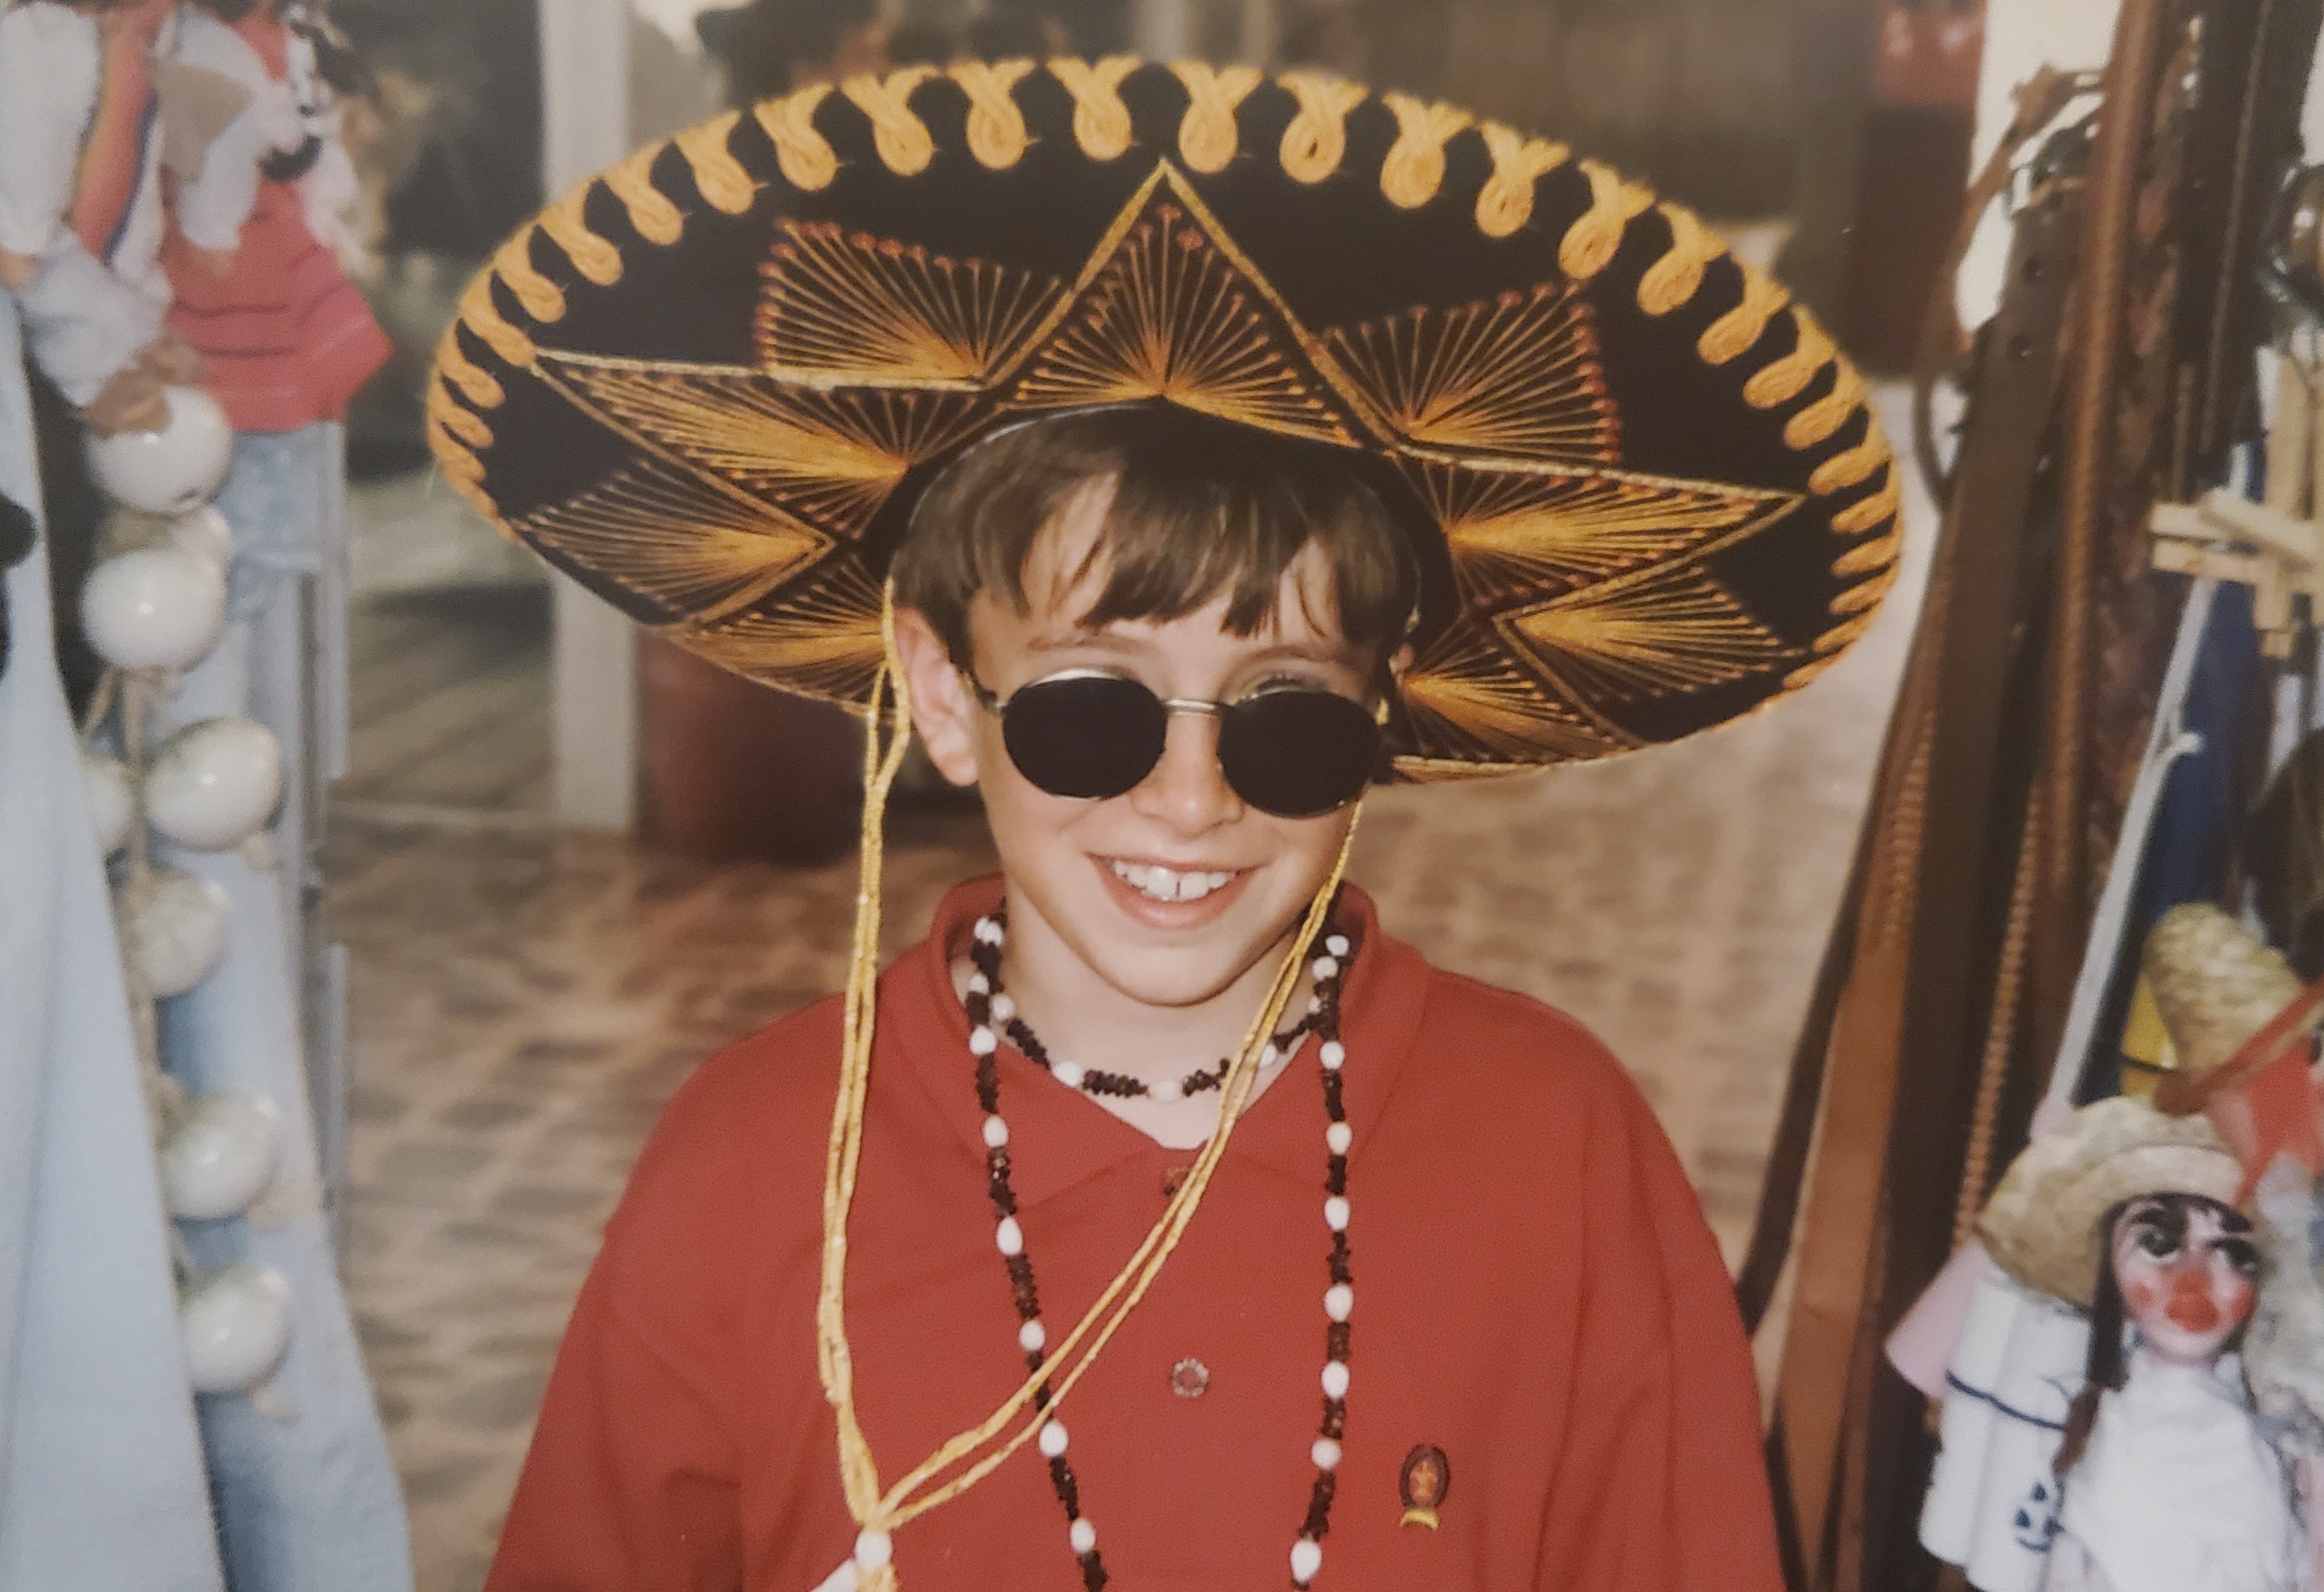 90s' kid wearing large sombrero and sunglasses